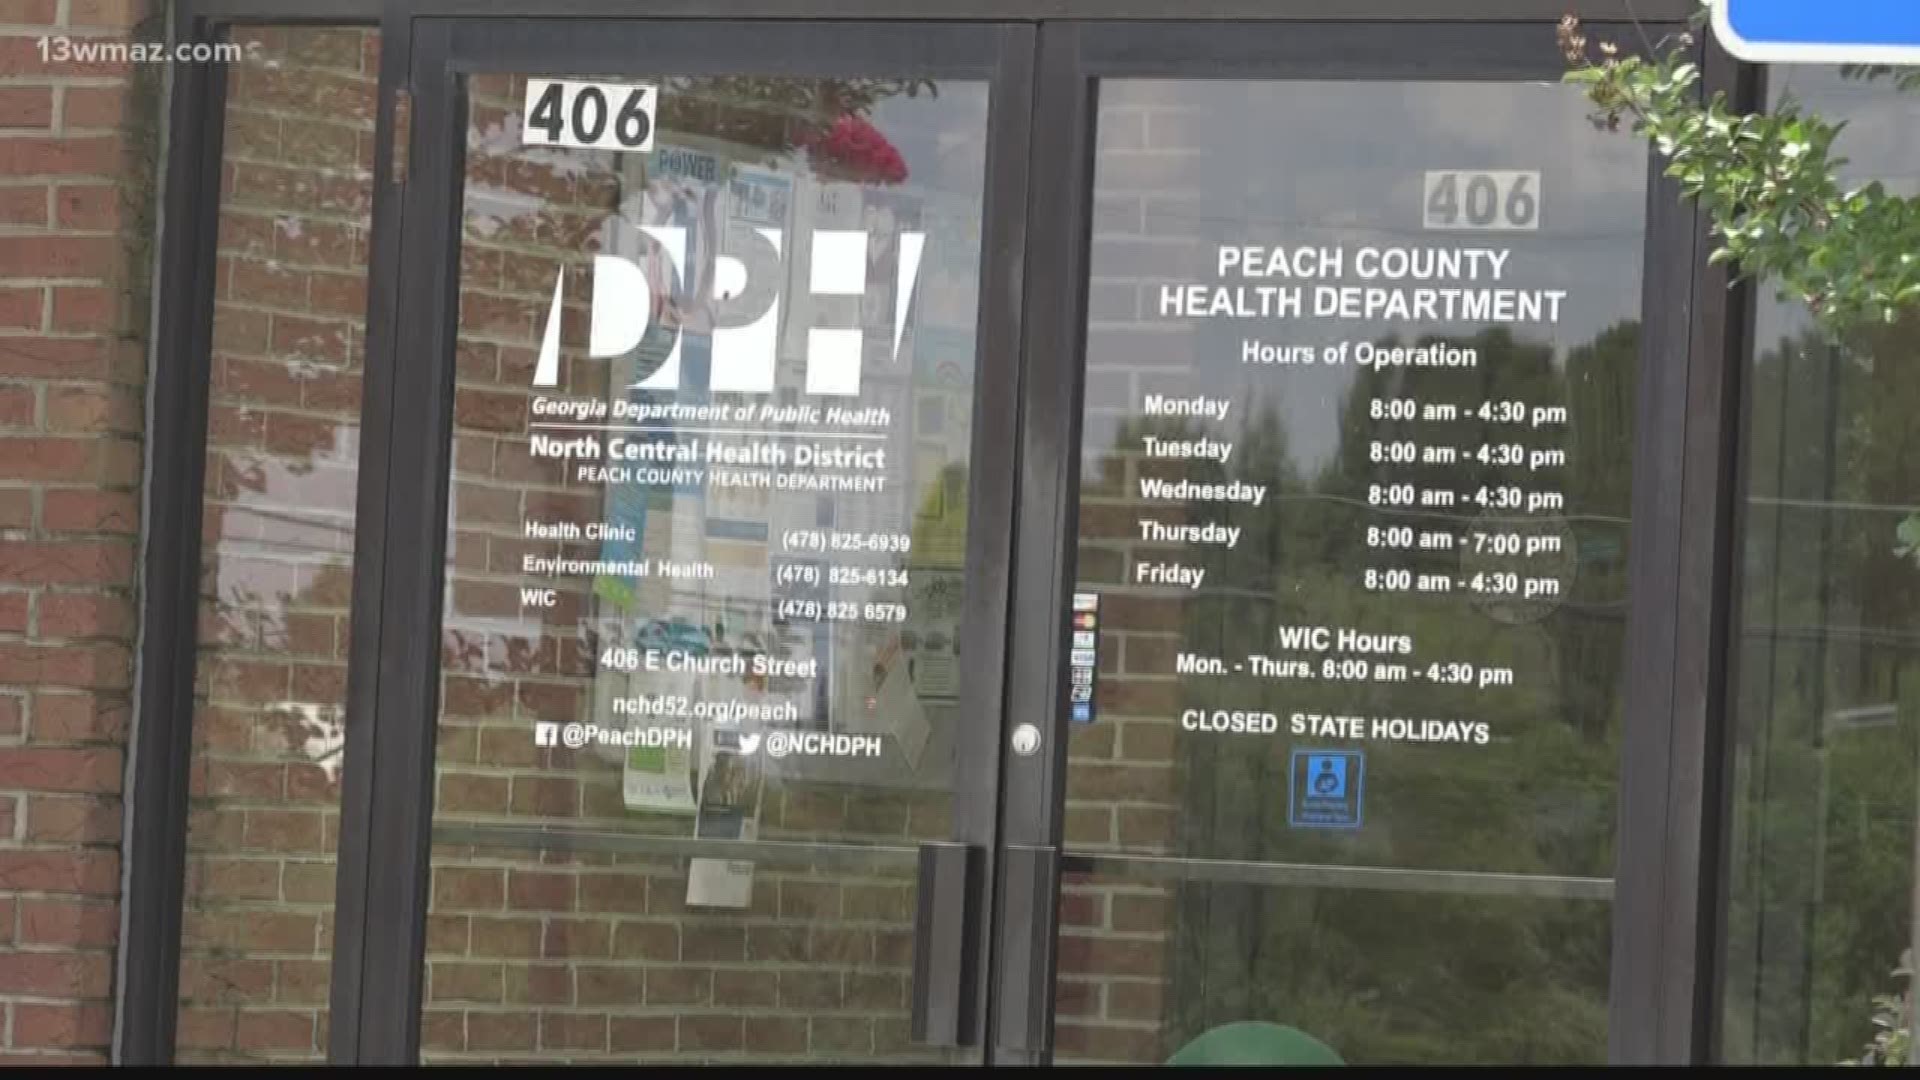 The Peach County Health Department is getting a new home for the time being while renovations take place. They'll officially be moved to a building across from Blue Bird Bus Company, and that will start August 19.